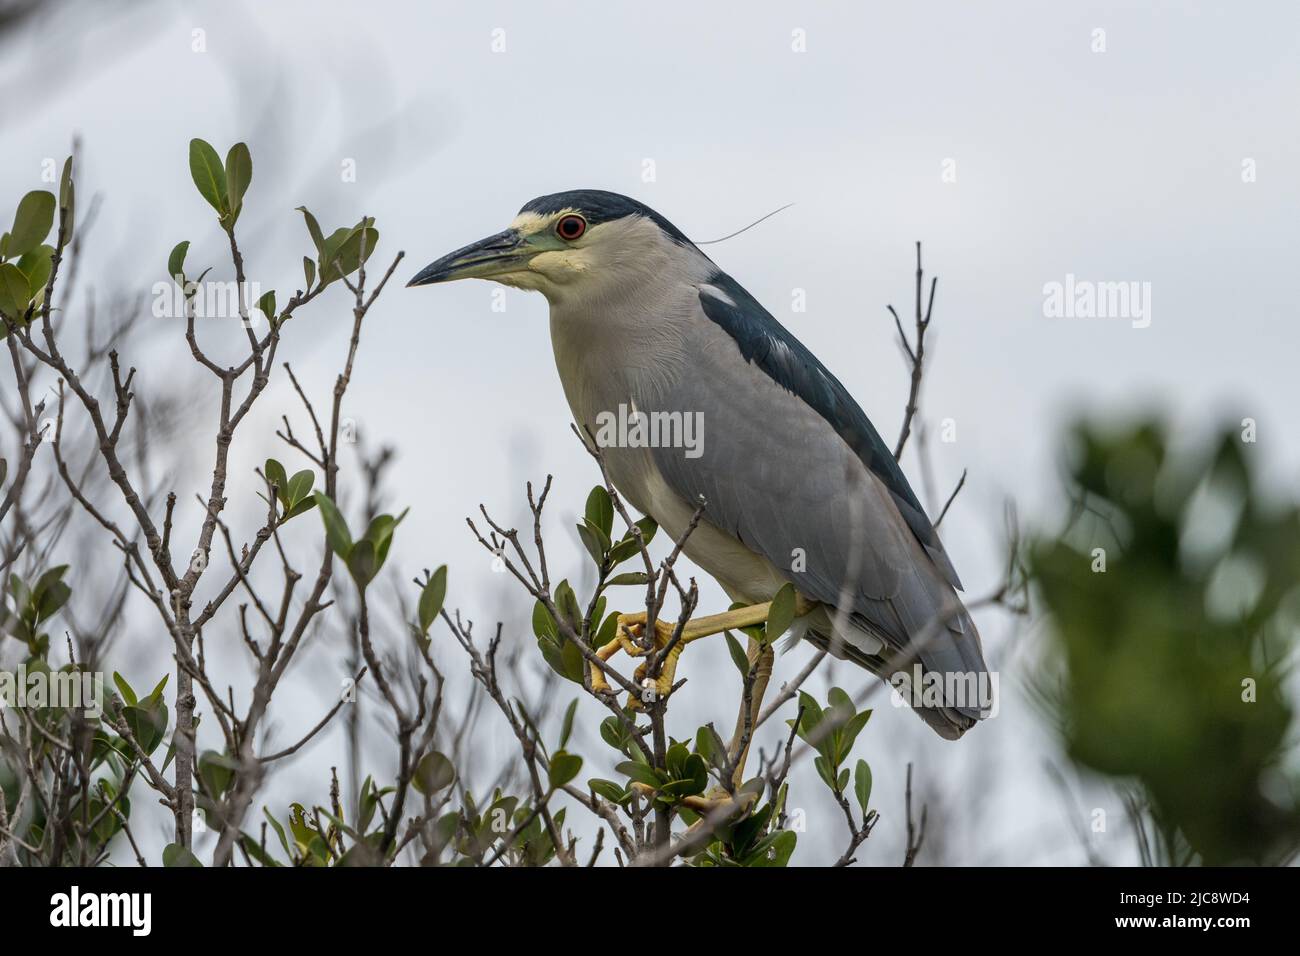 A Black-crowned Night Heron perched in a black mangrove tree in the South Padre Island Birding Center in Texas. Stock Photo